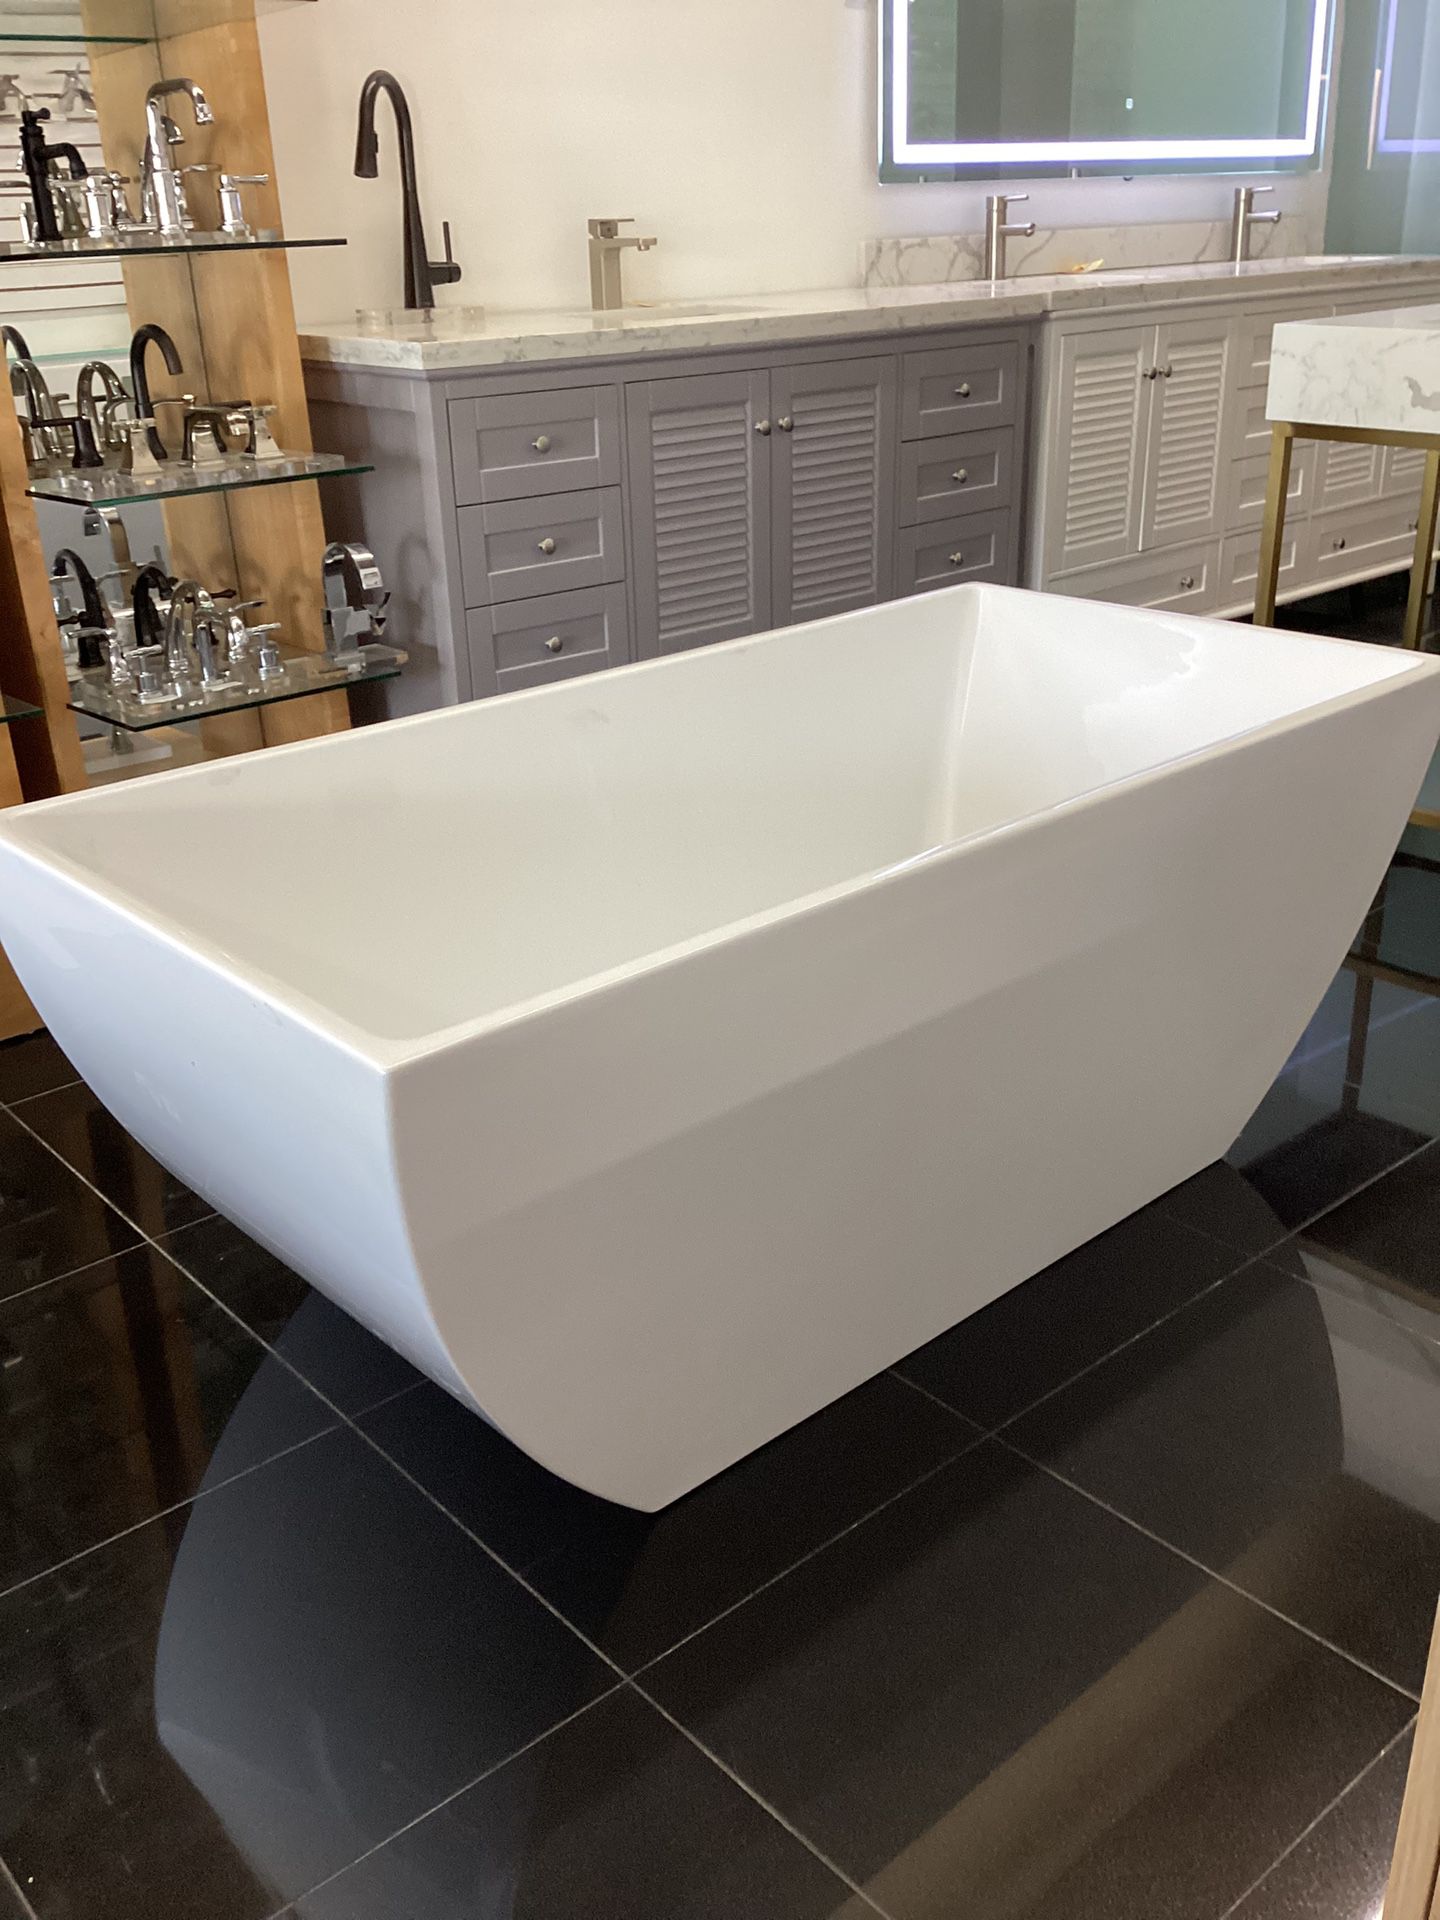 59” Freestanding Bathtub Ready For Pick up 